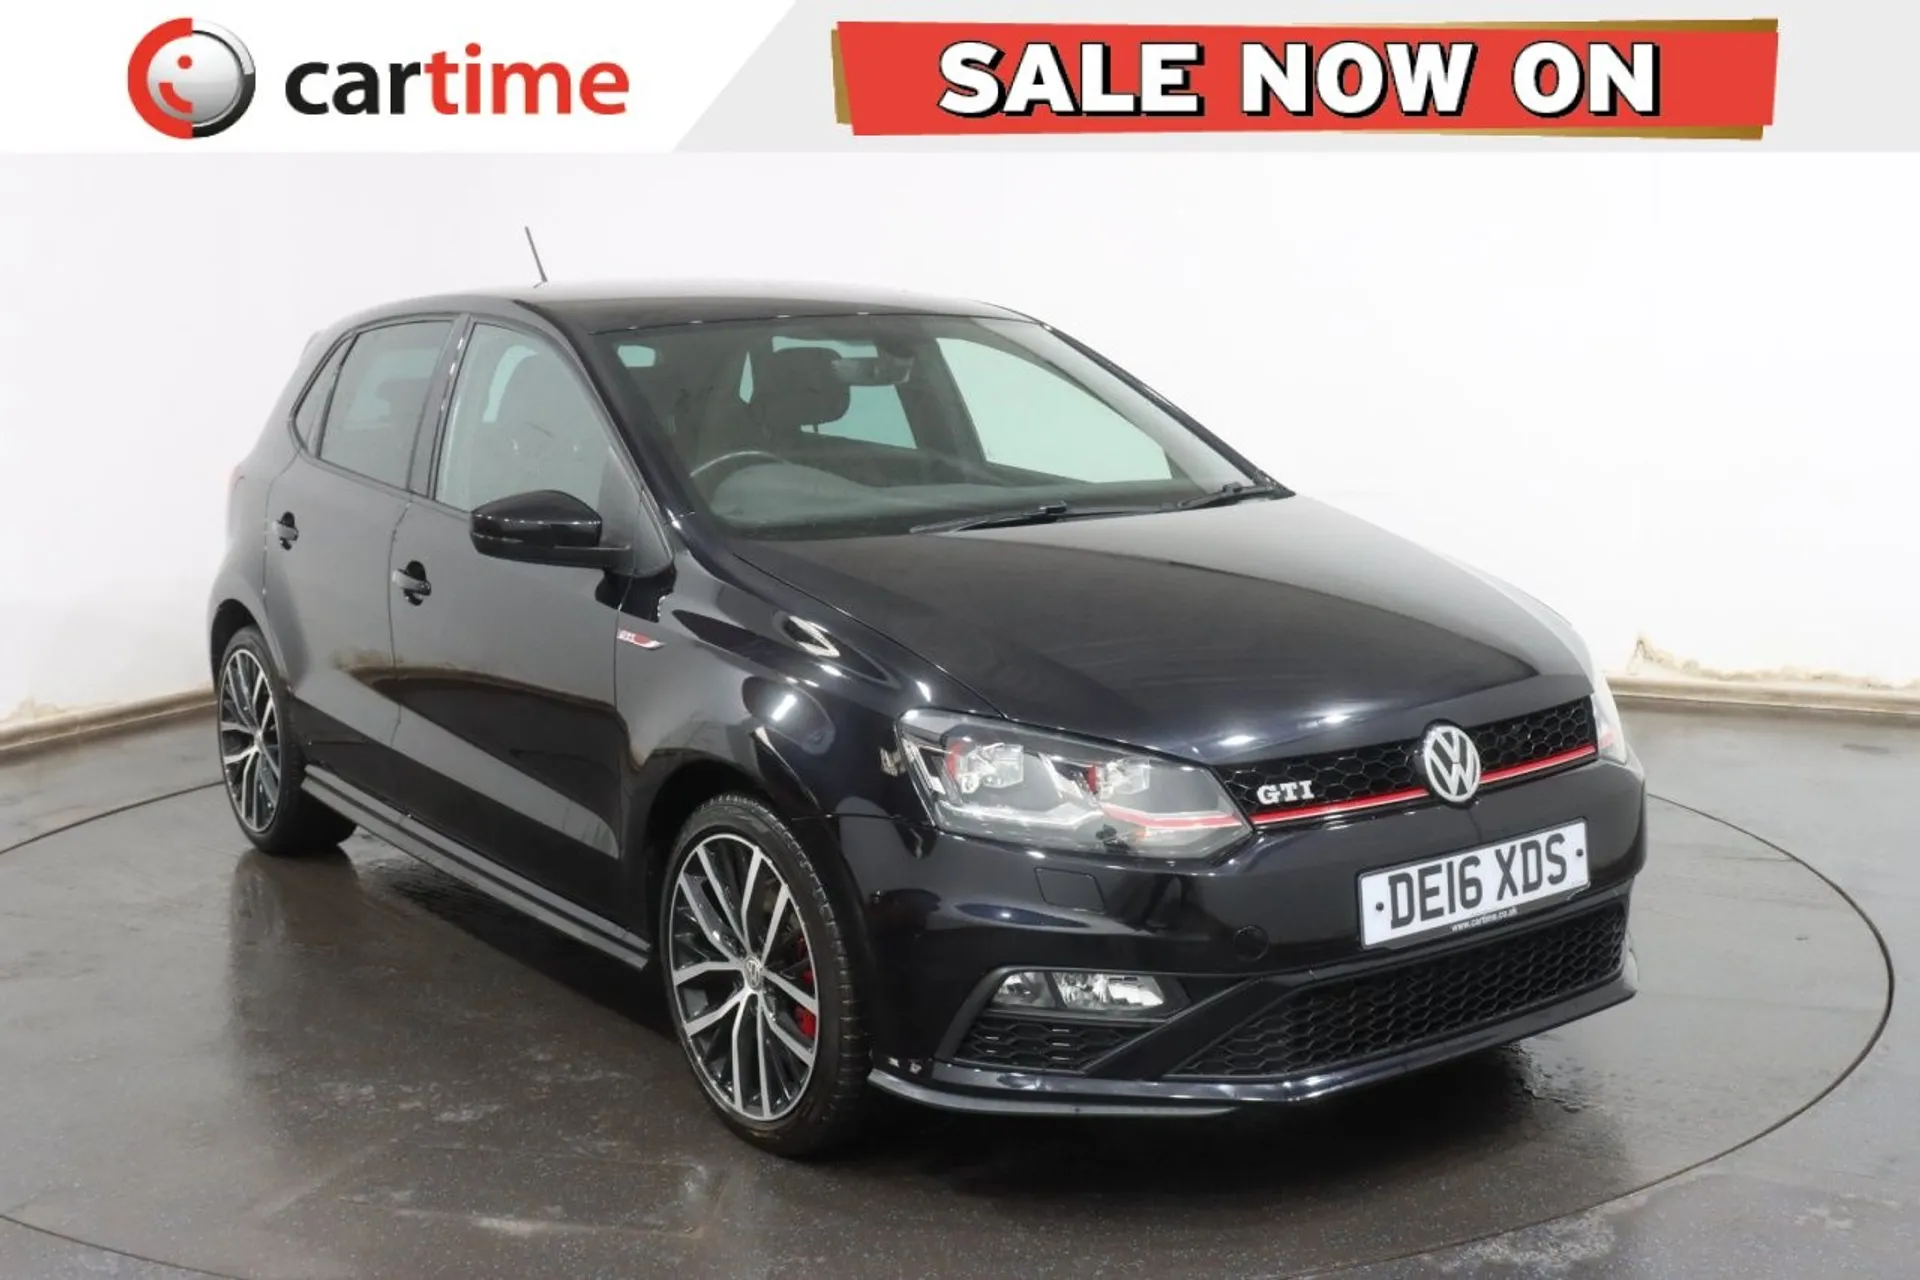 bruger labyrint Diskutere Volkswagen Polo 1.8 GTI 5d 189 BHP 6.5in Display, DAB Radio, Bluetooth,  17in Alloys, Air Conditioning 17in Alloys, Deep Black